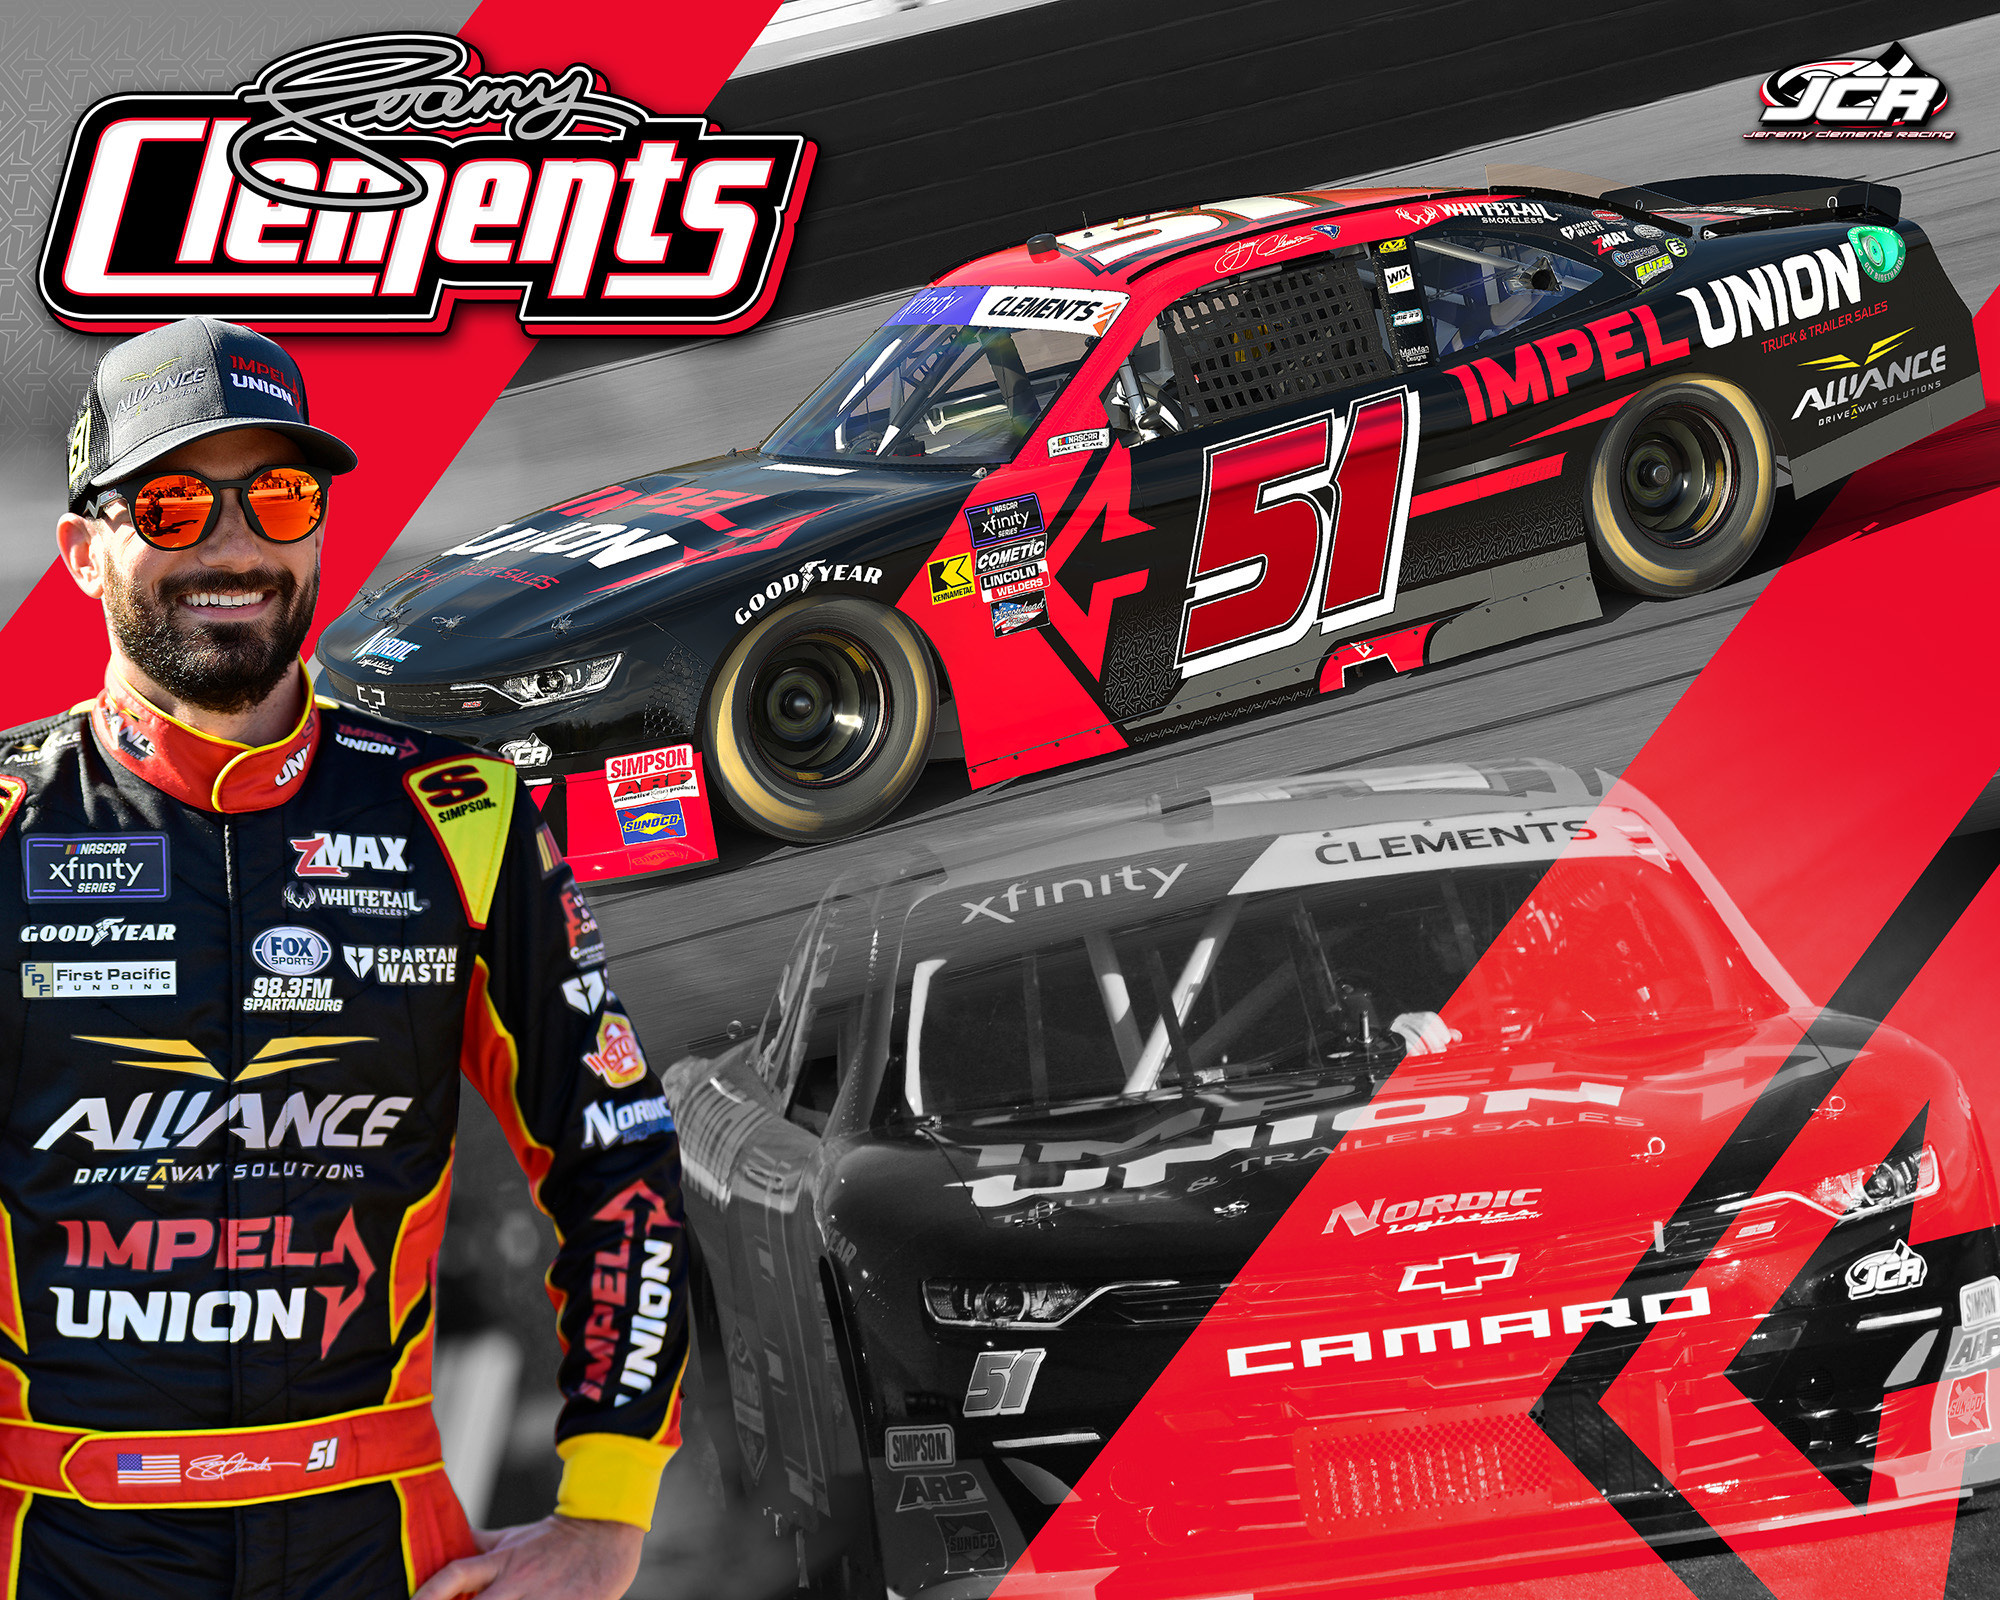 Jeremy Clements Racing’s fleet of partners will grow again in 2024; Impel Union to make season premiere at COTA